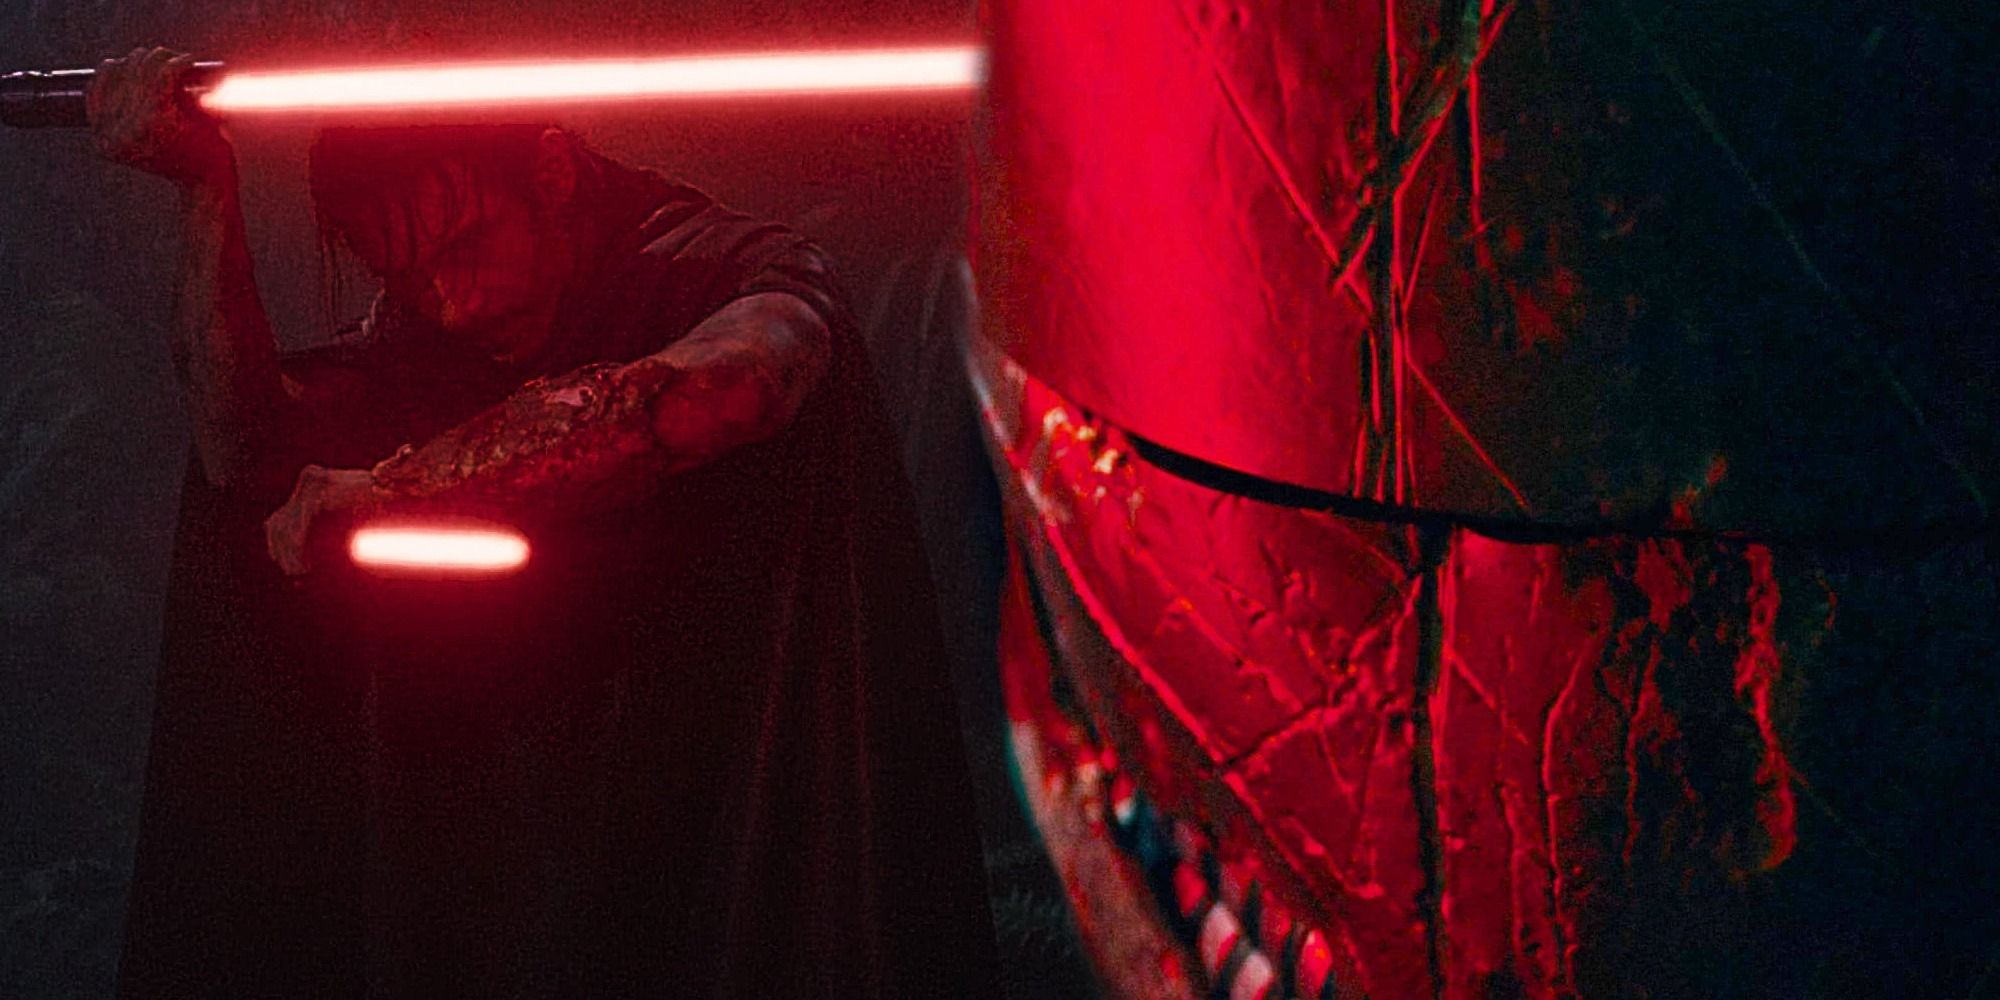 Qimir from the Acolyte holding up two red lightsabers to the left and a close up of the Stranger's mask to the right all in a red hue in a combined image